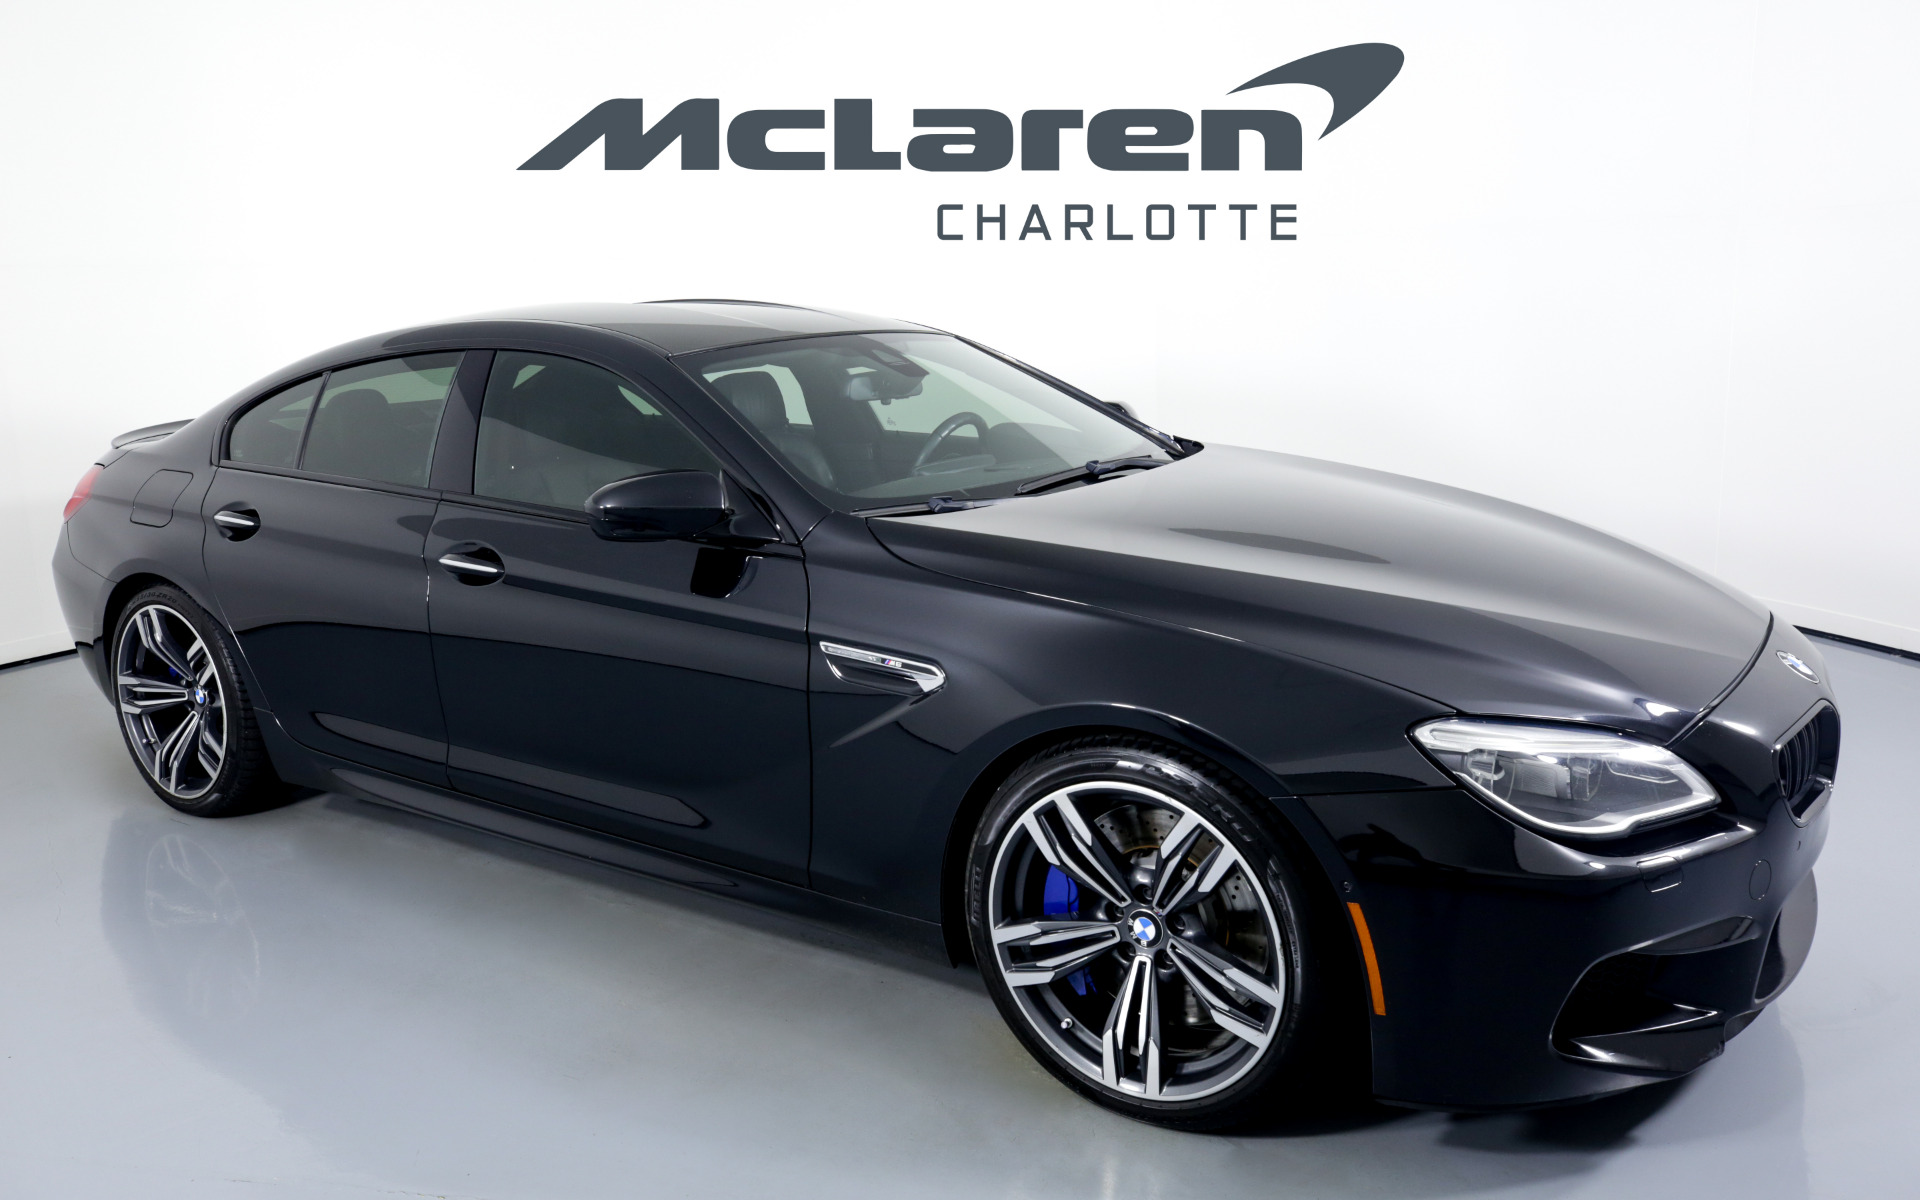 Used 16 Bmw M6 Gran Coupe For Sale 64 996 Mclaren Charlotte Stock